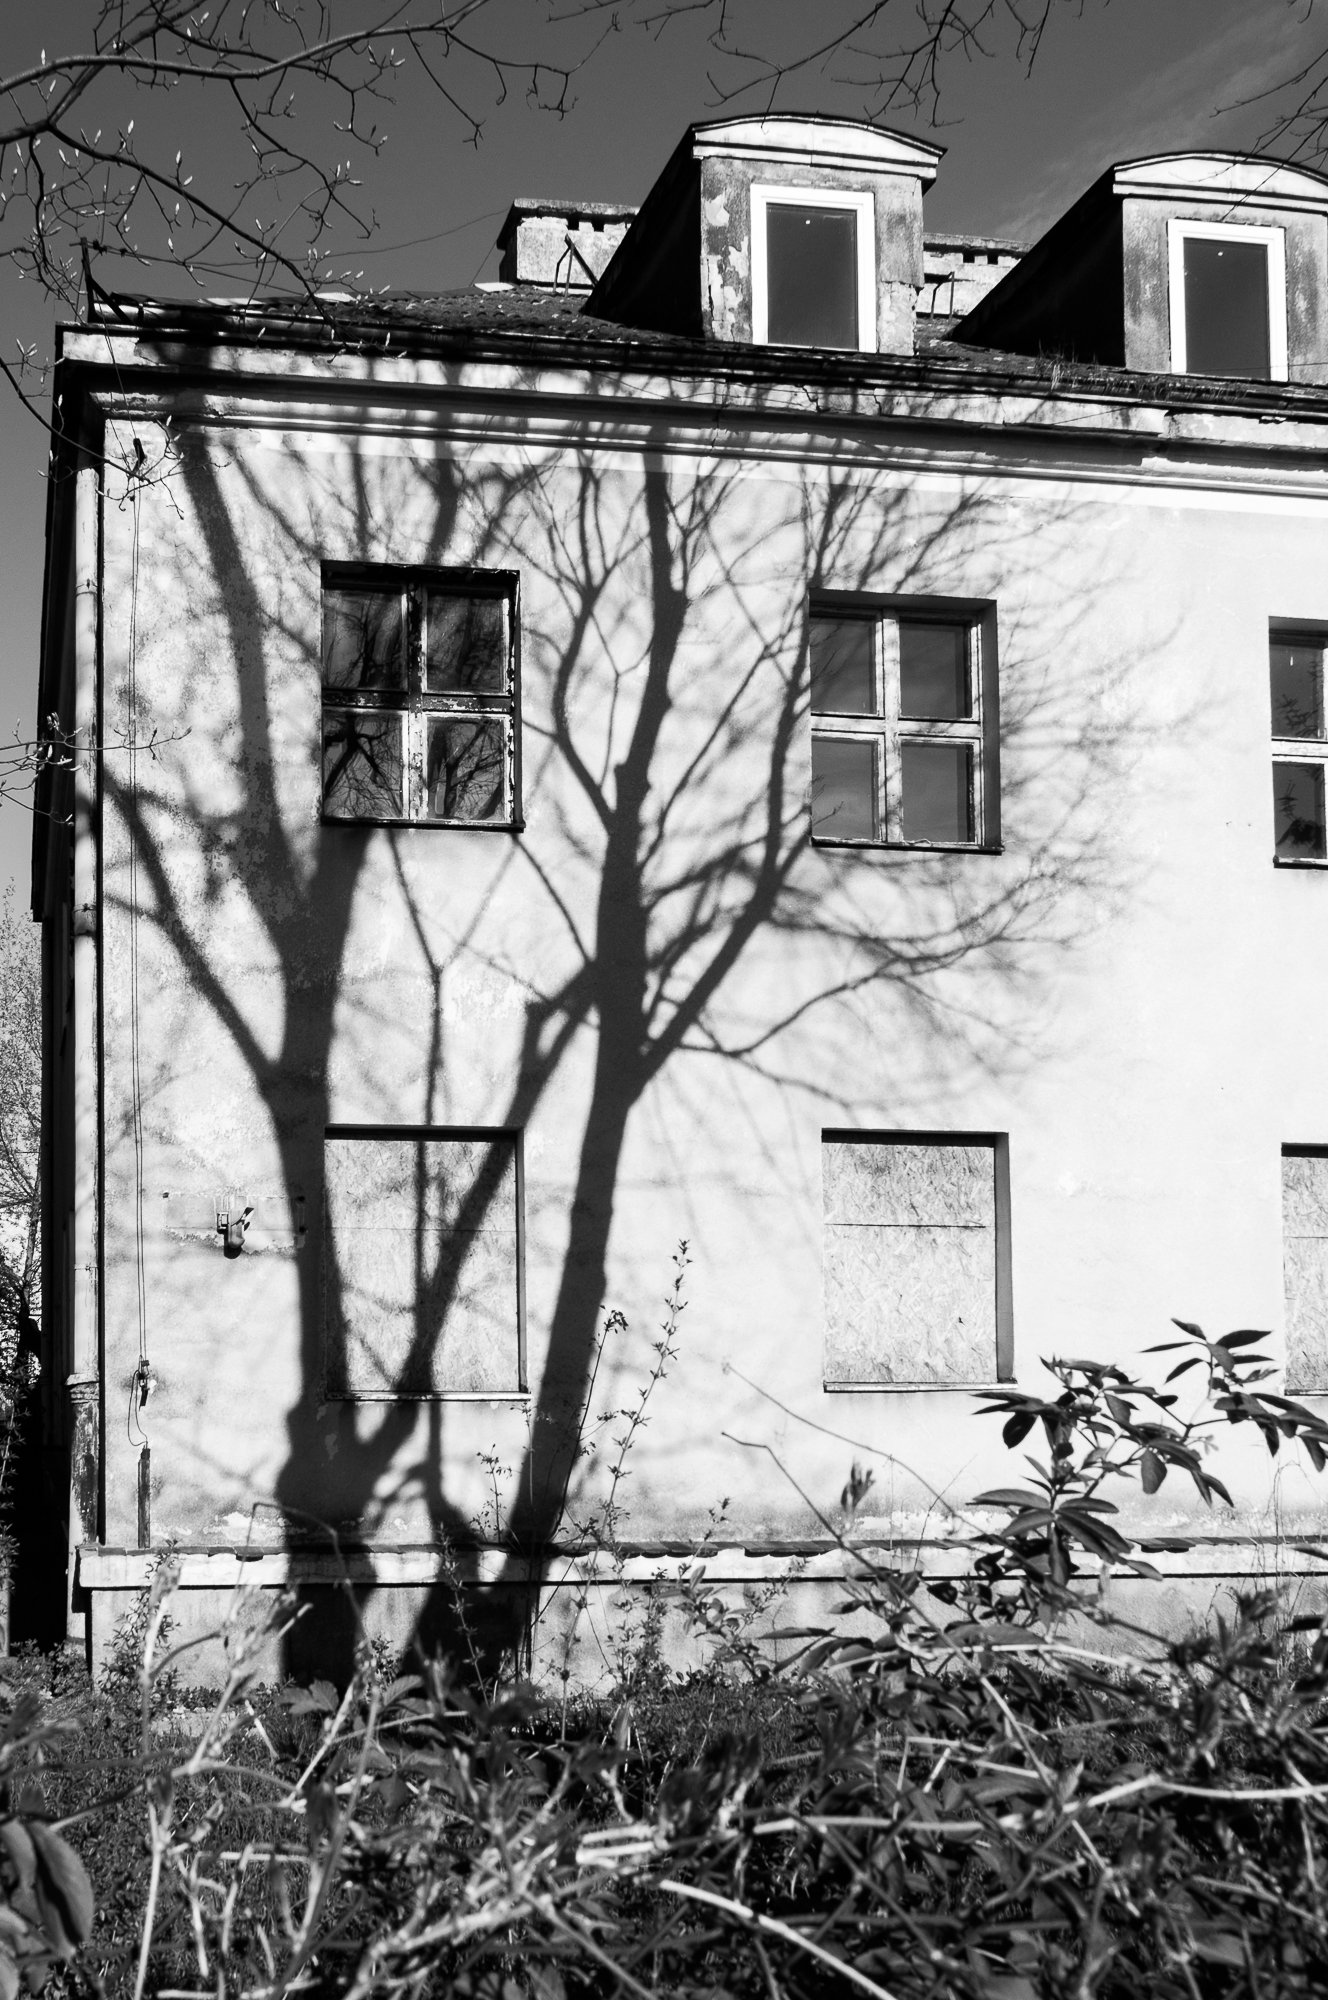 Adam Mazek Photography 2021. Warsaw Street Photography. Post: "Why do I take pictures?" Minimalism. Shadow of the tree.